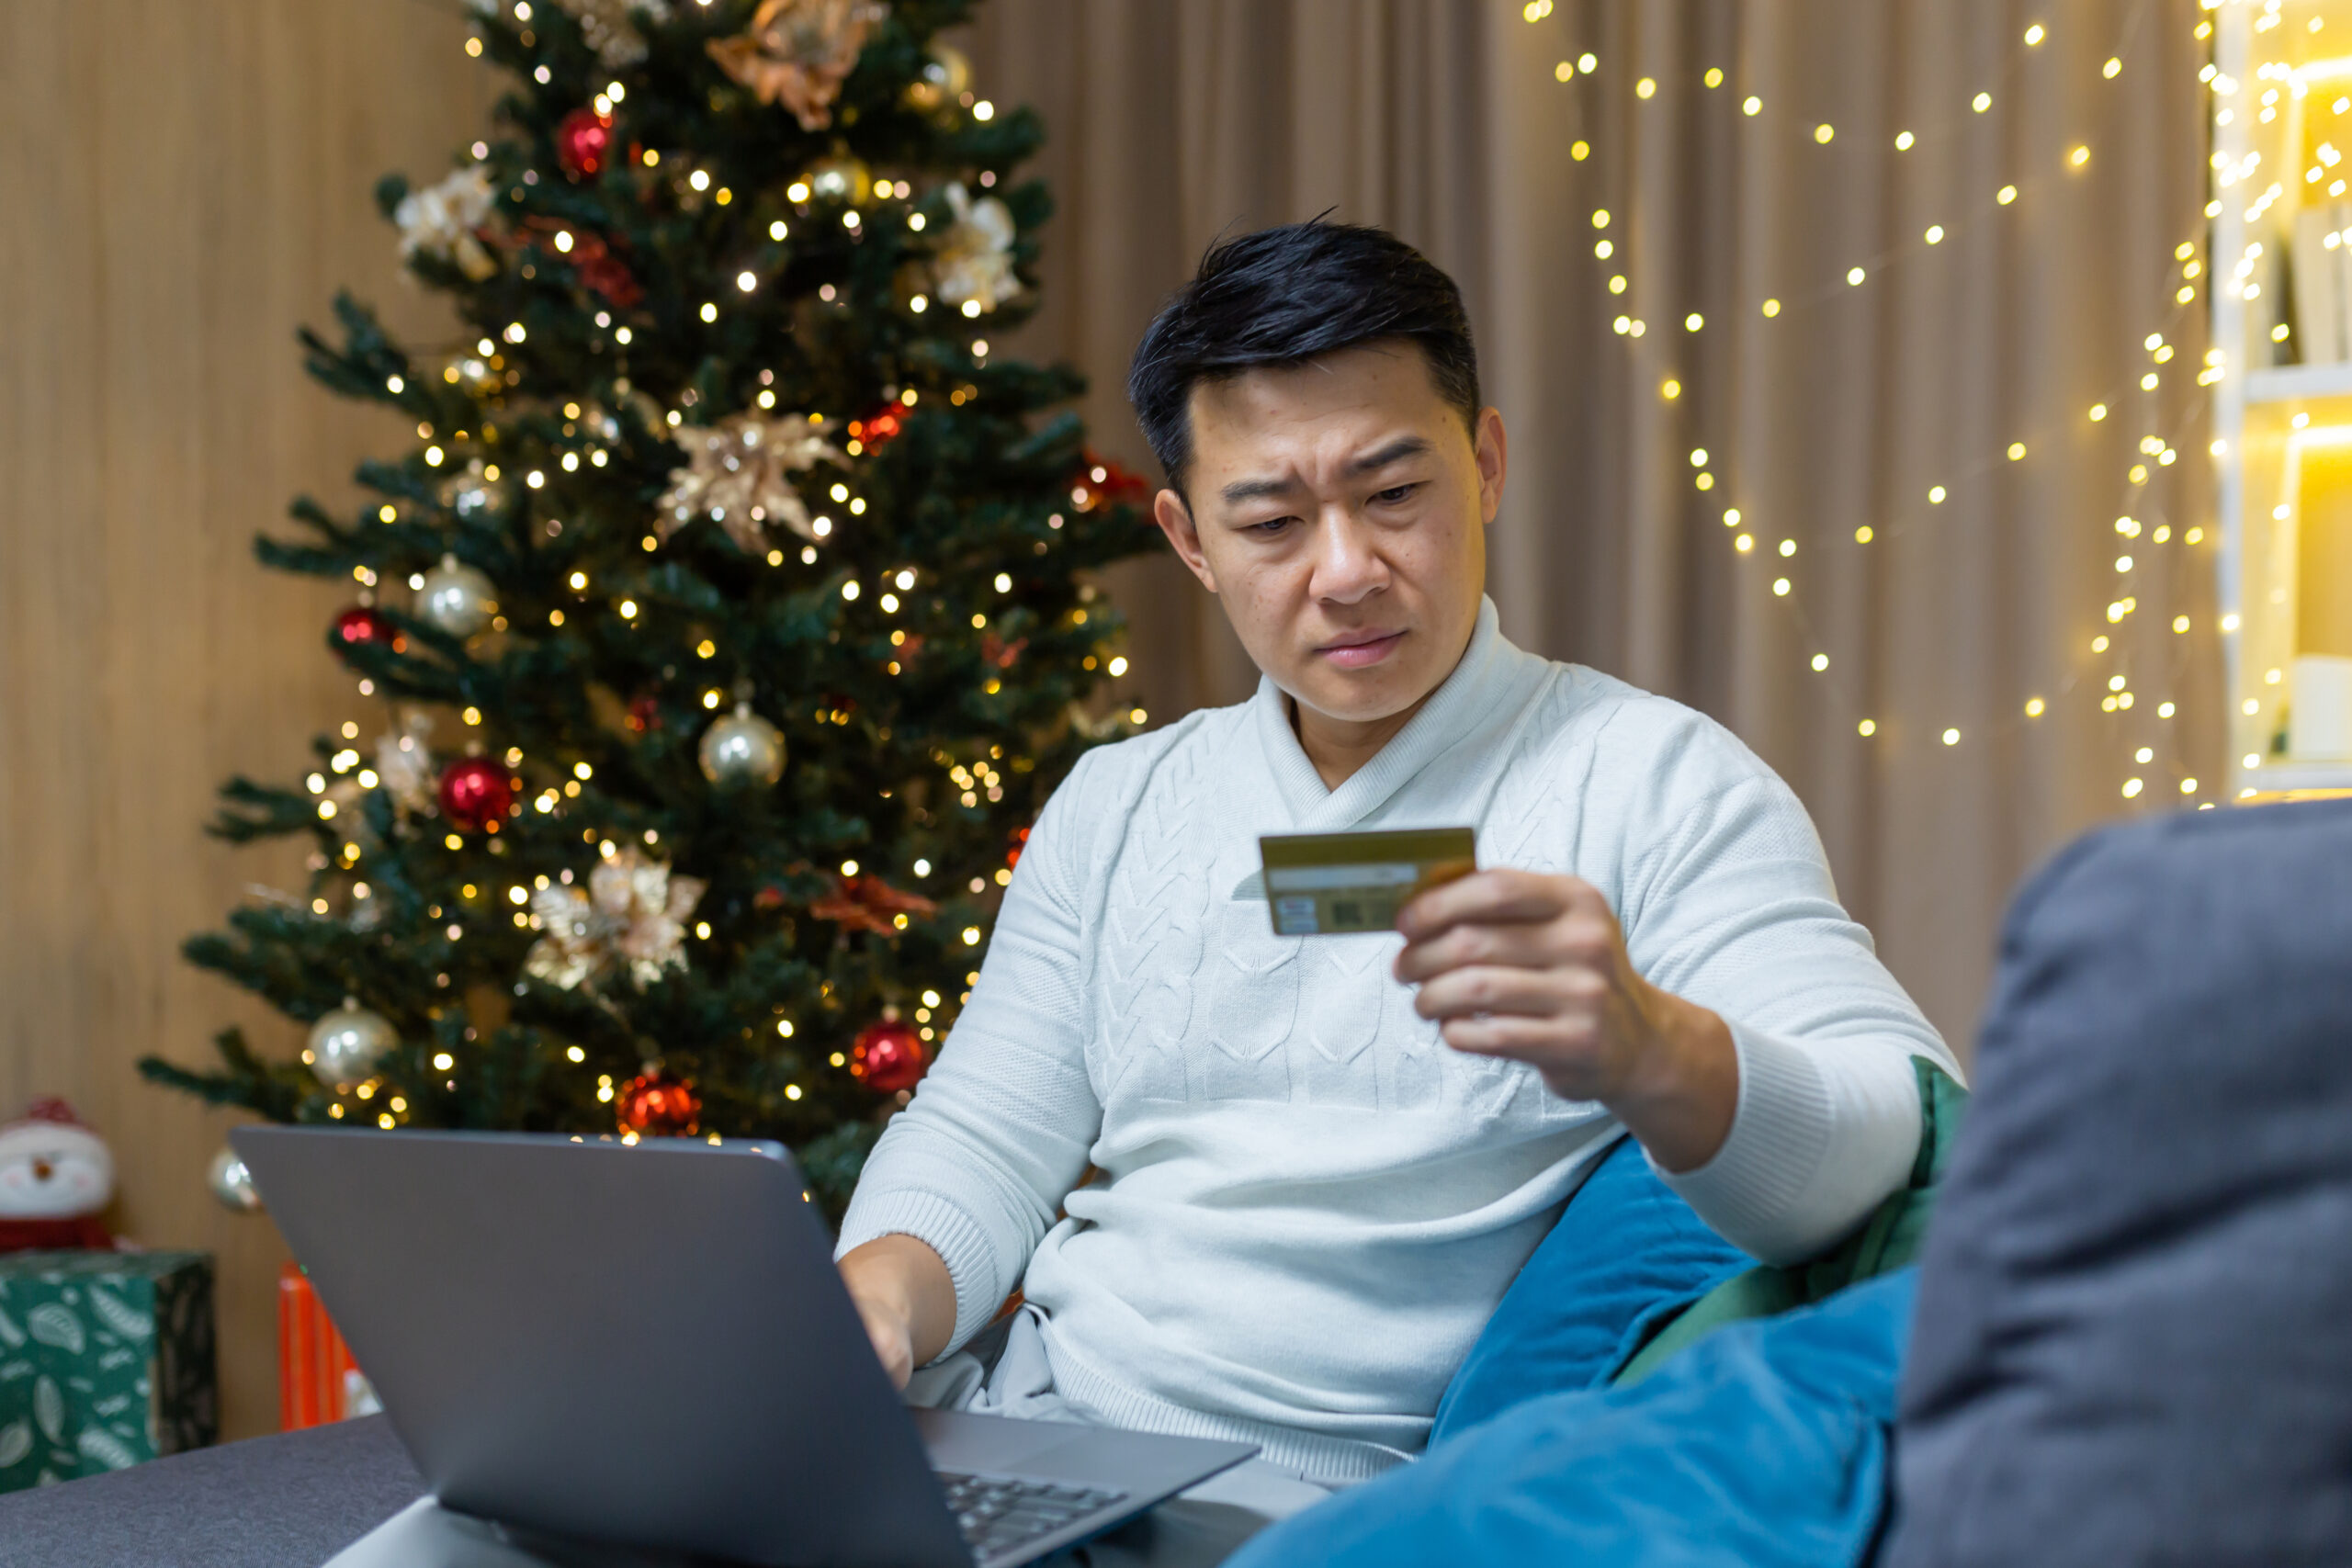 Man looking at his credit card in front of a Christmas tree